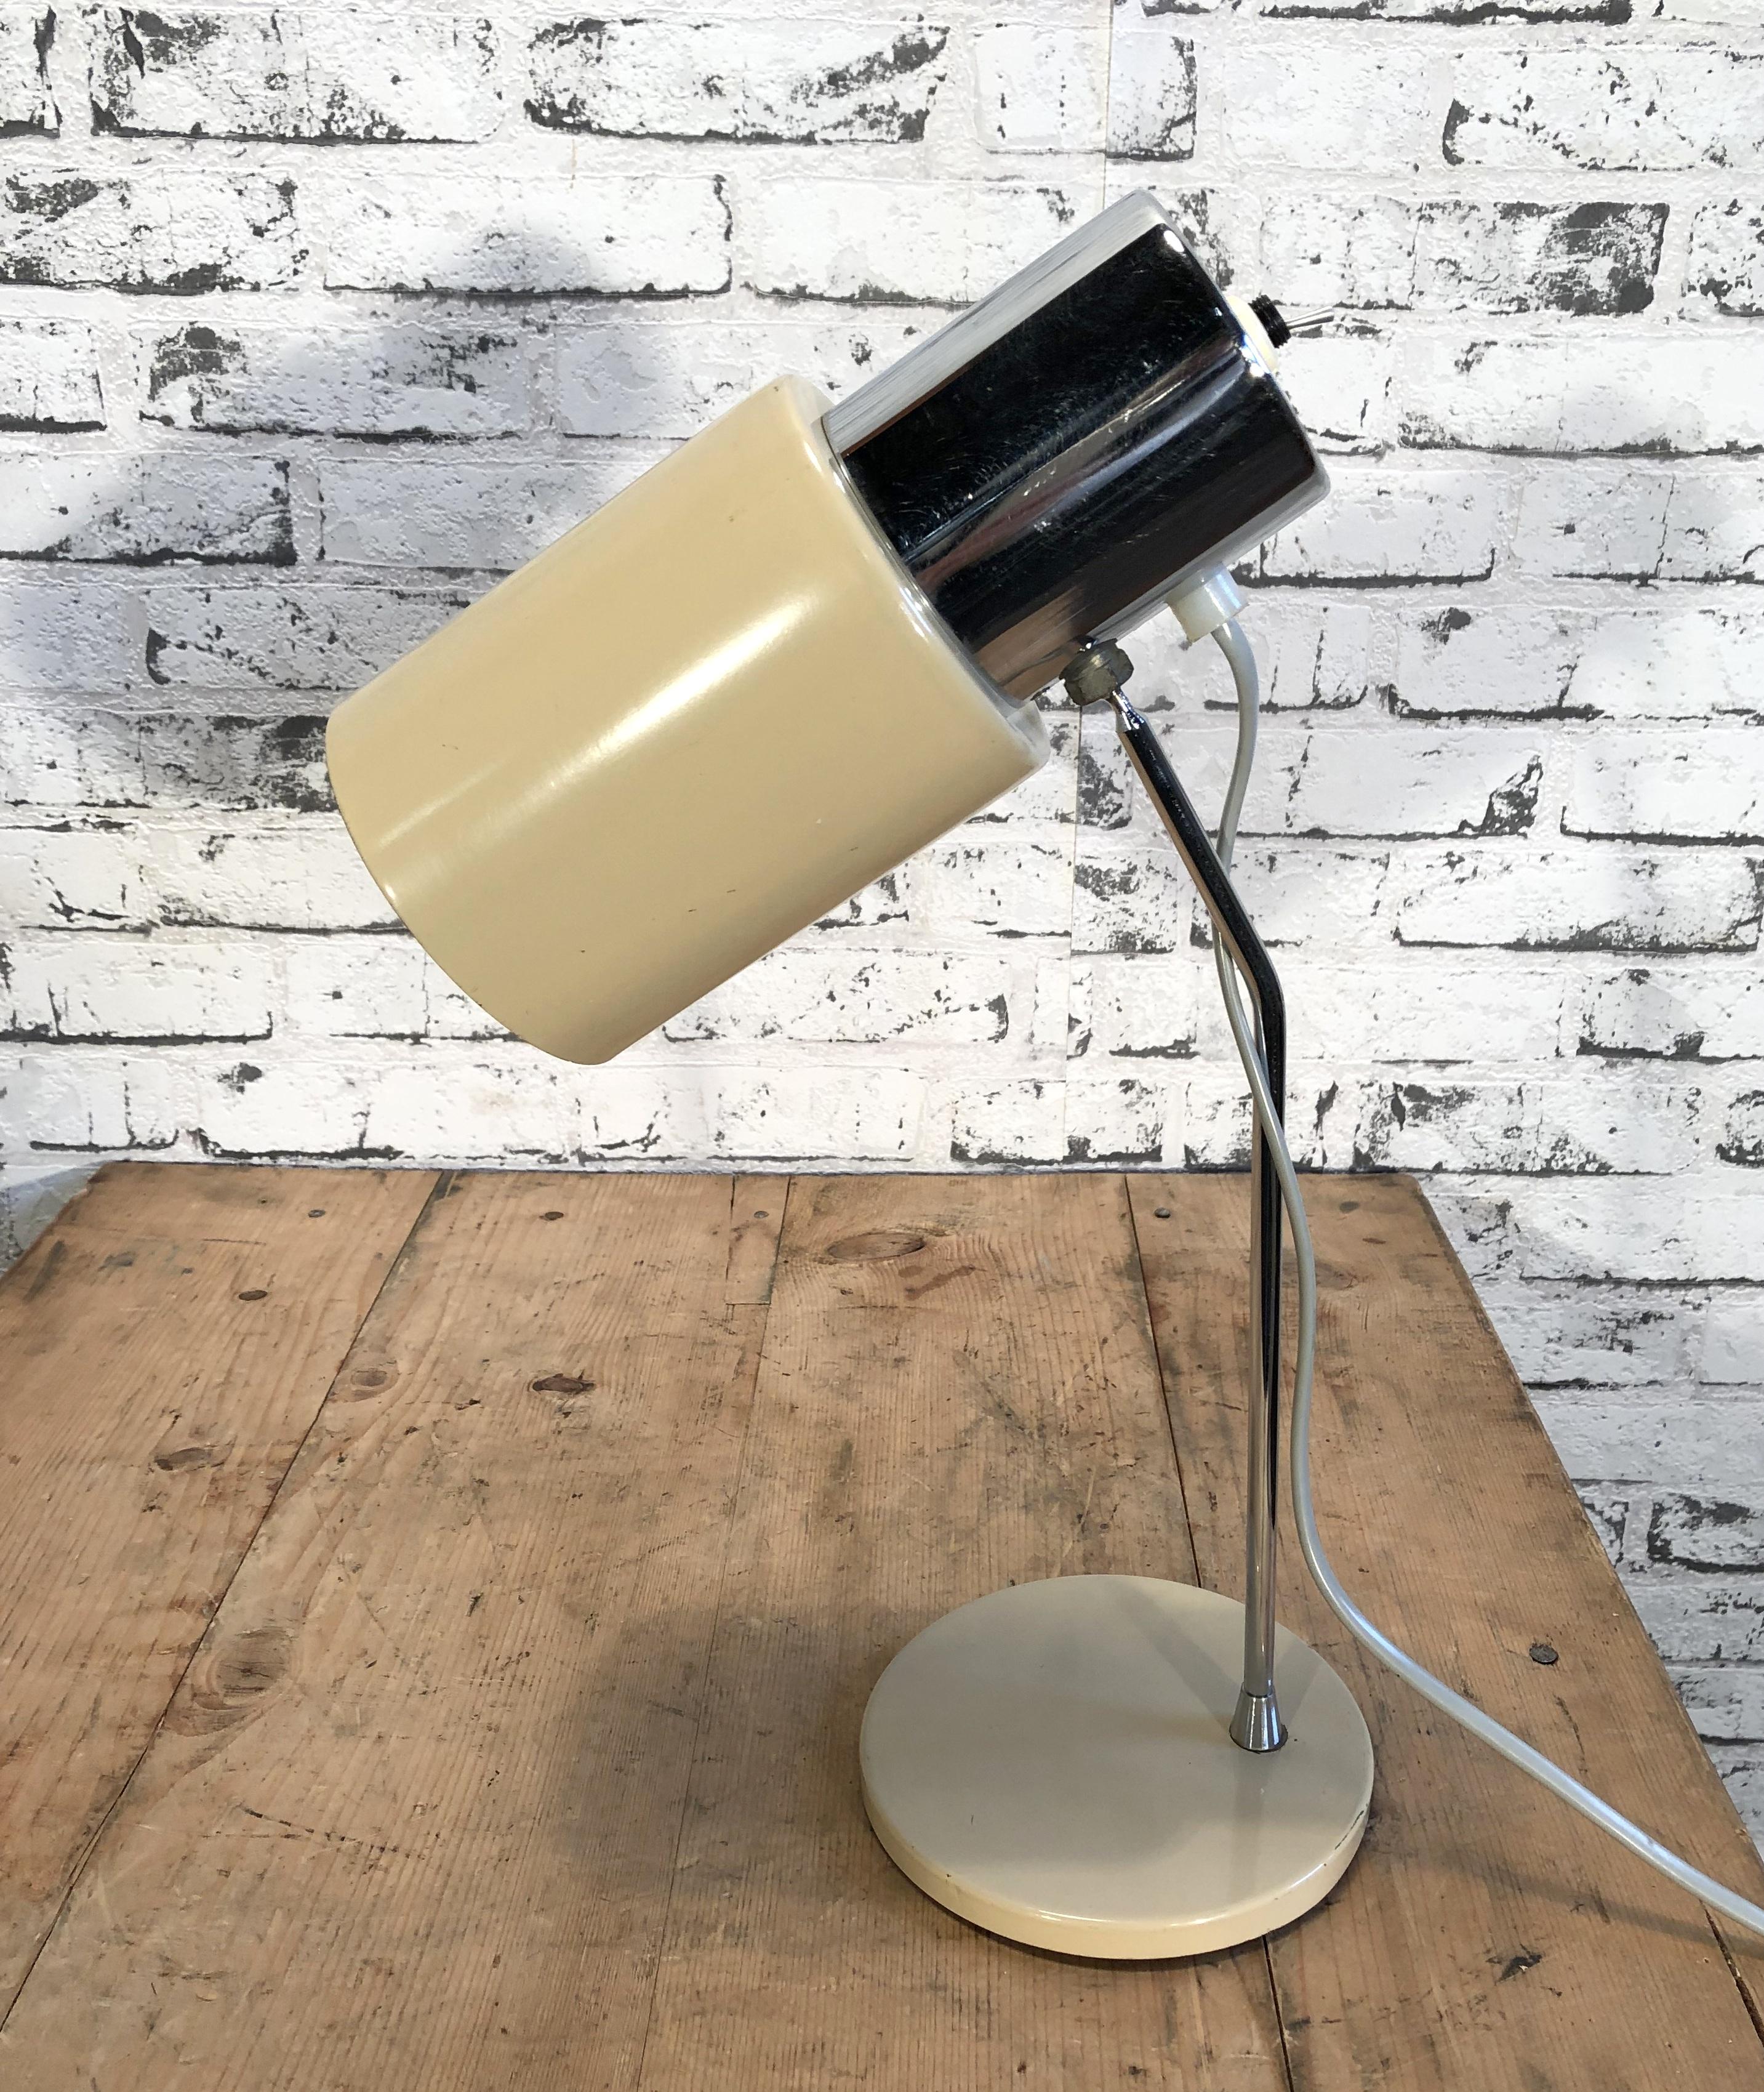 This table lamp,Napako model 1636, was designed by Josef Hurka and produced in former Czechoslovakia by Napako during the 1970s. .Fully functional. Good vintage condition.Socket for E 27 lightbulbs.